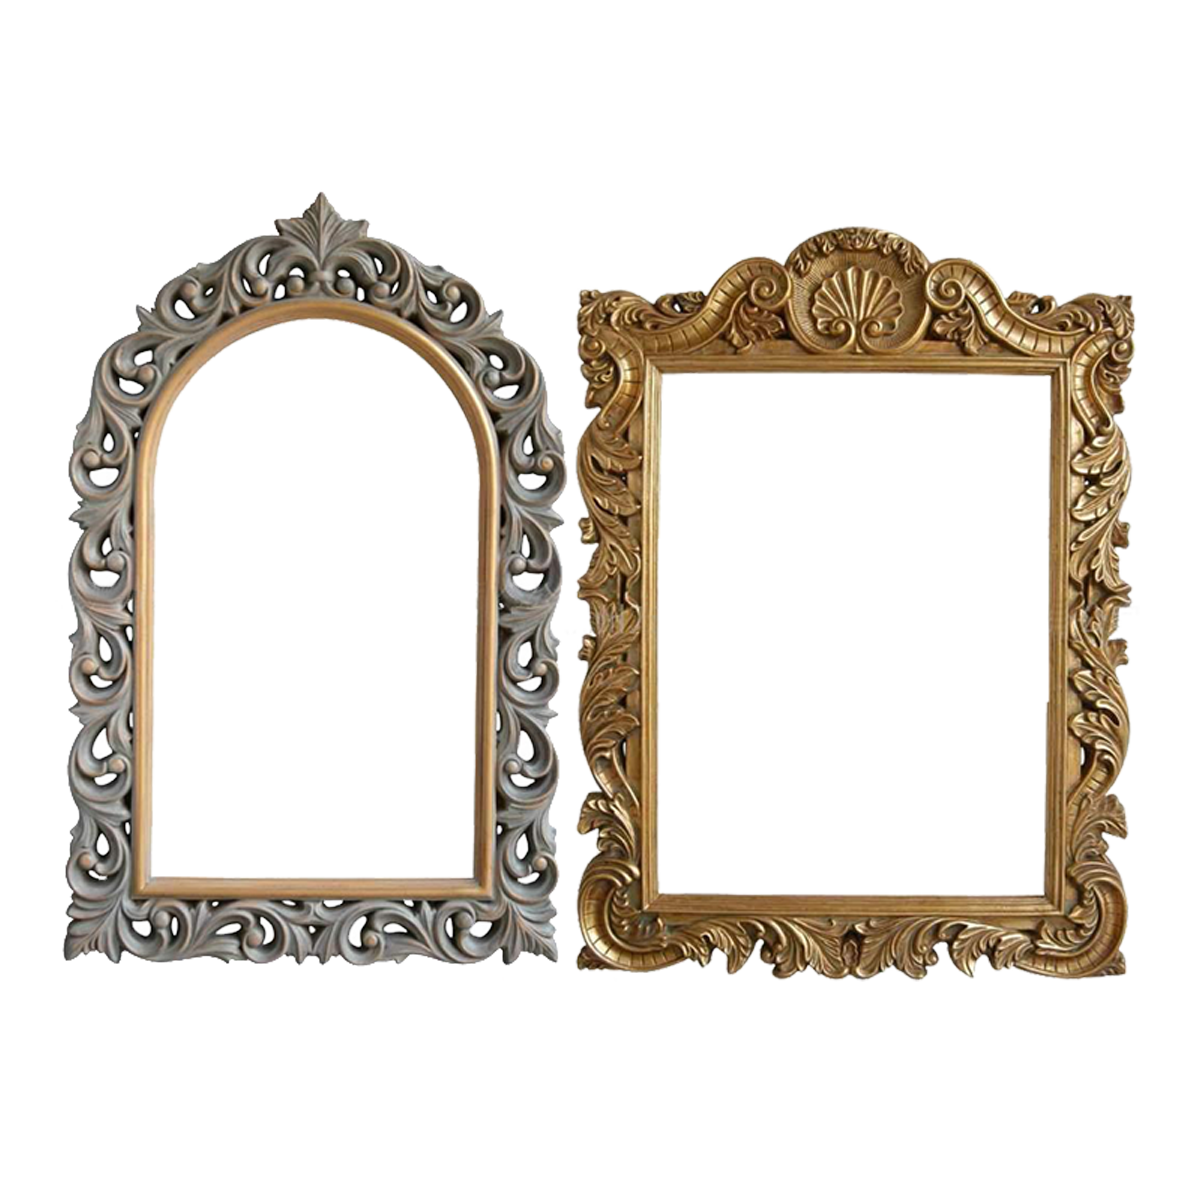 Picture Frame Door Download HQ PNG Clipart